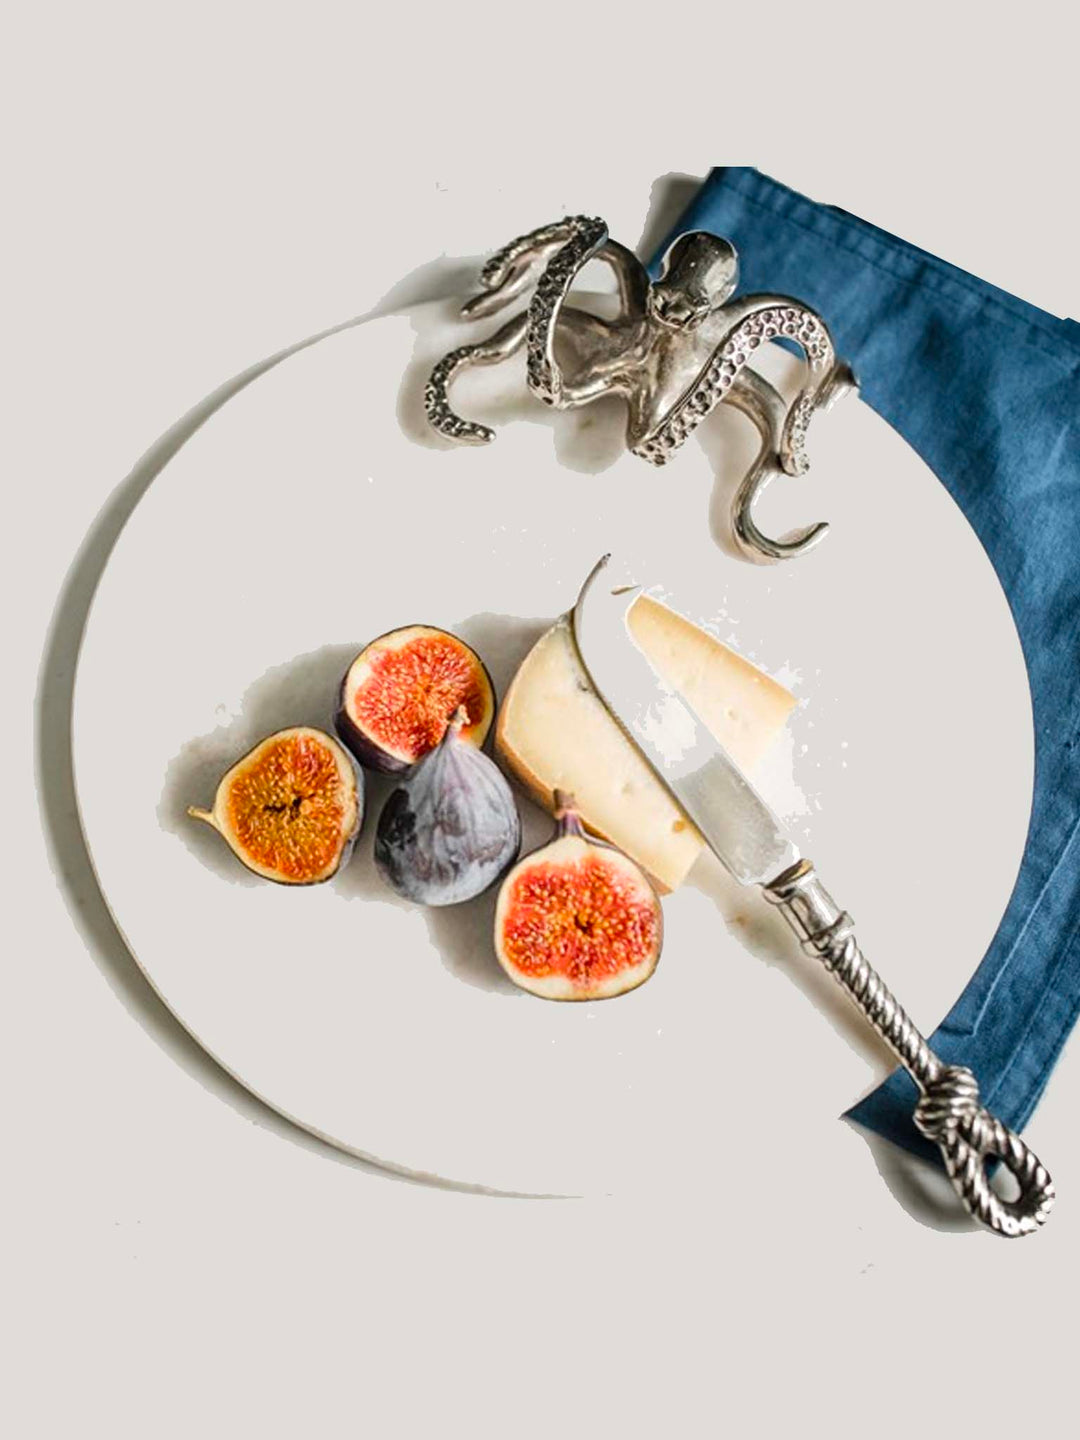 Cheese board, Silver Octopus,  Tableware, Marble Board, Culinary Concepts, Dinnerware. dining room essentials 